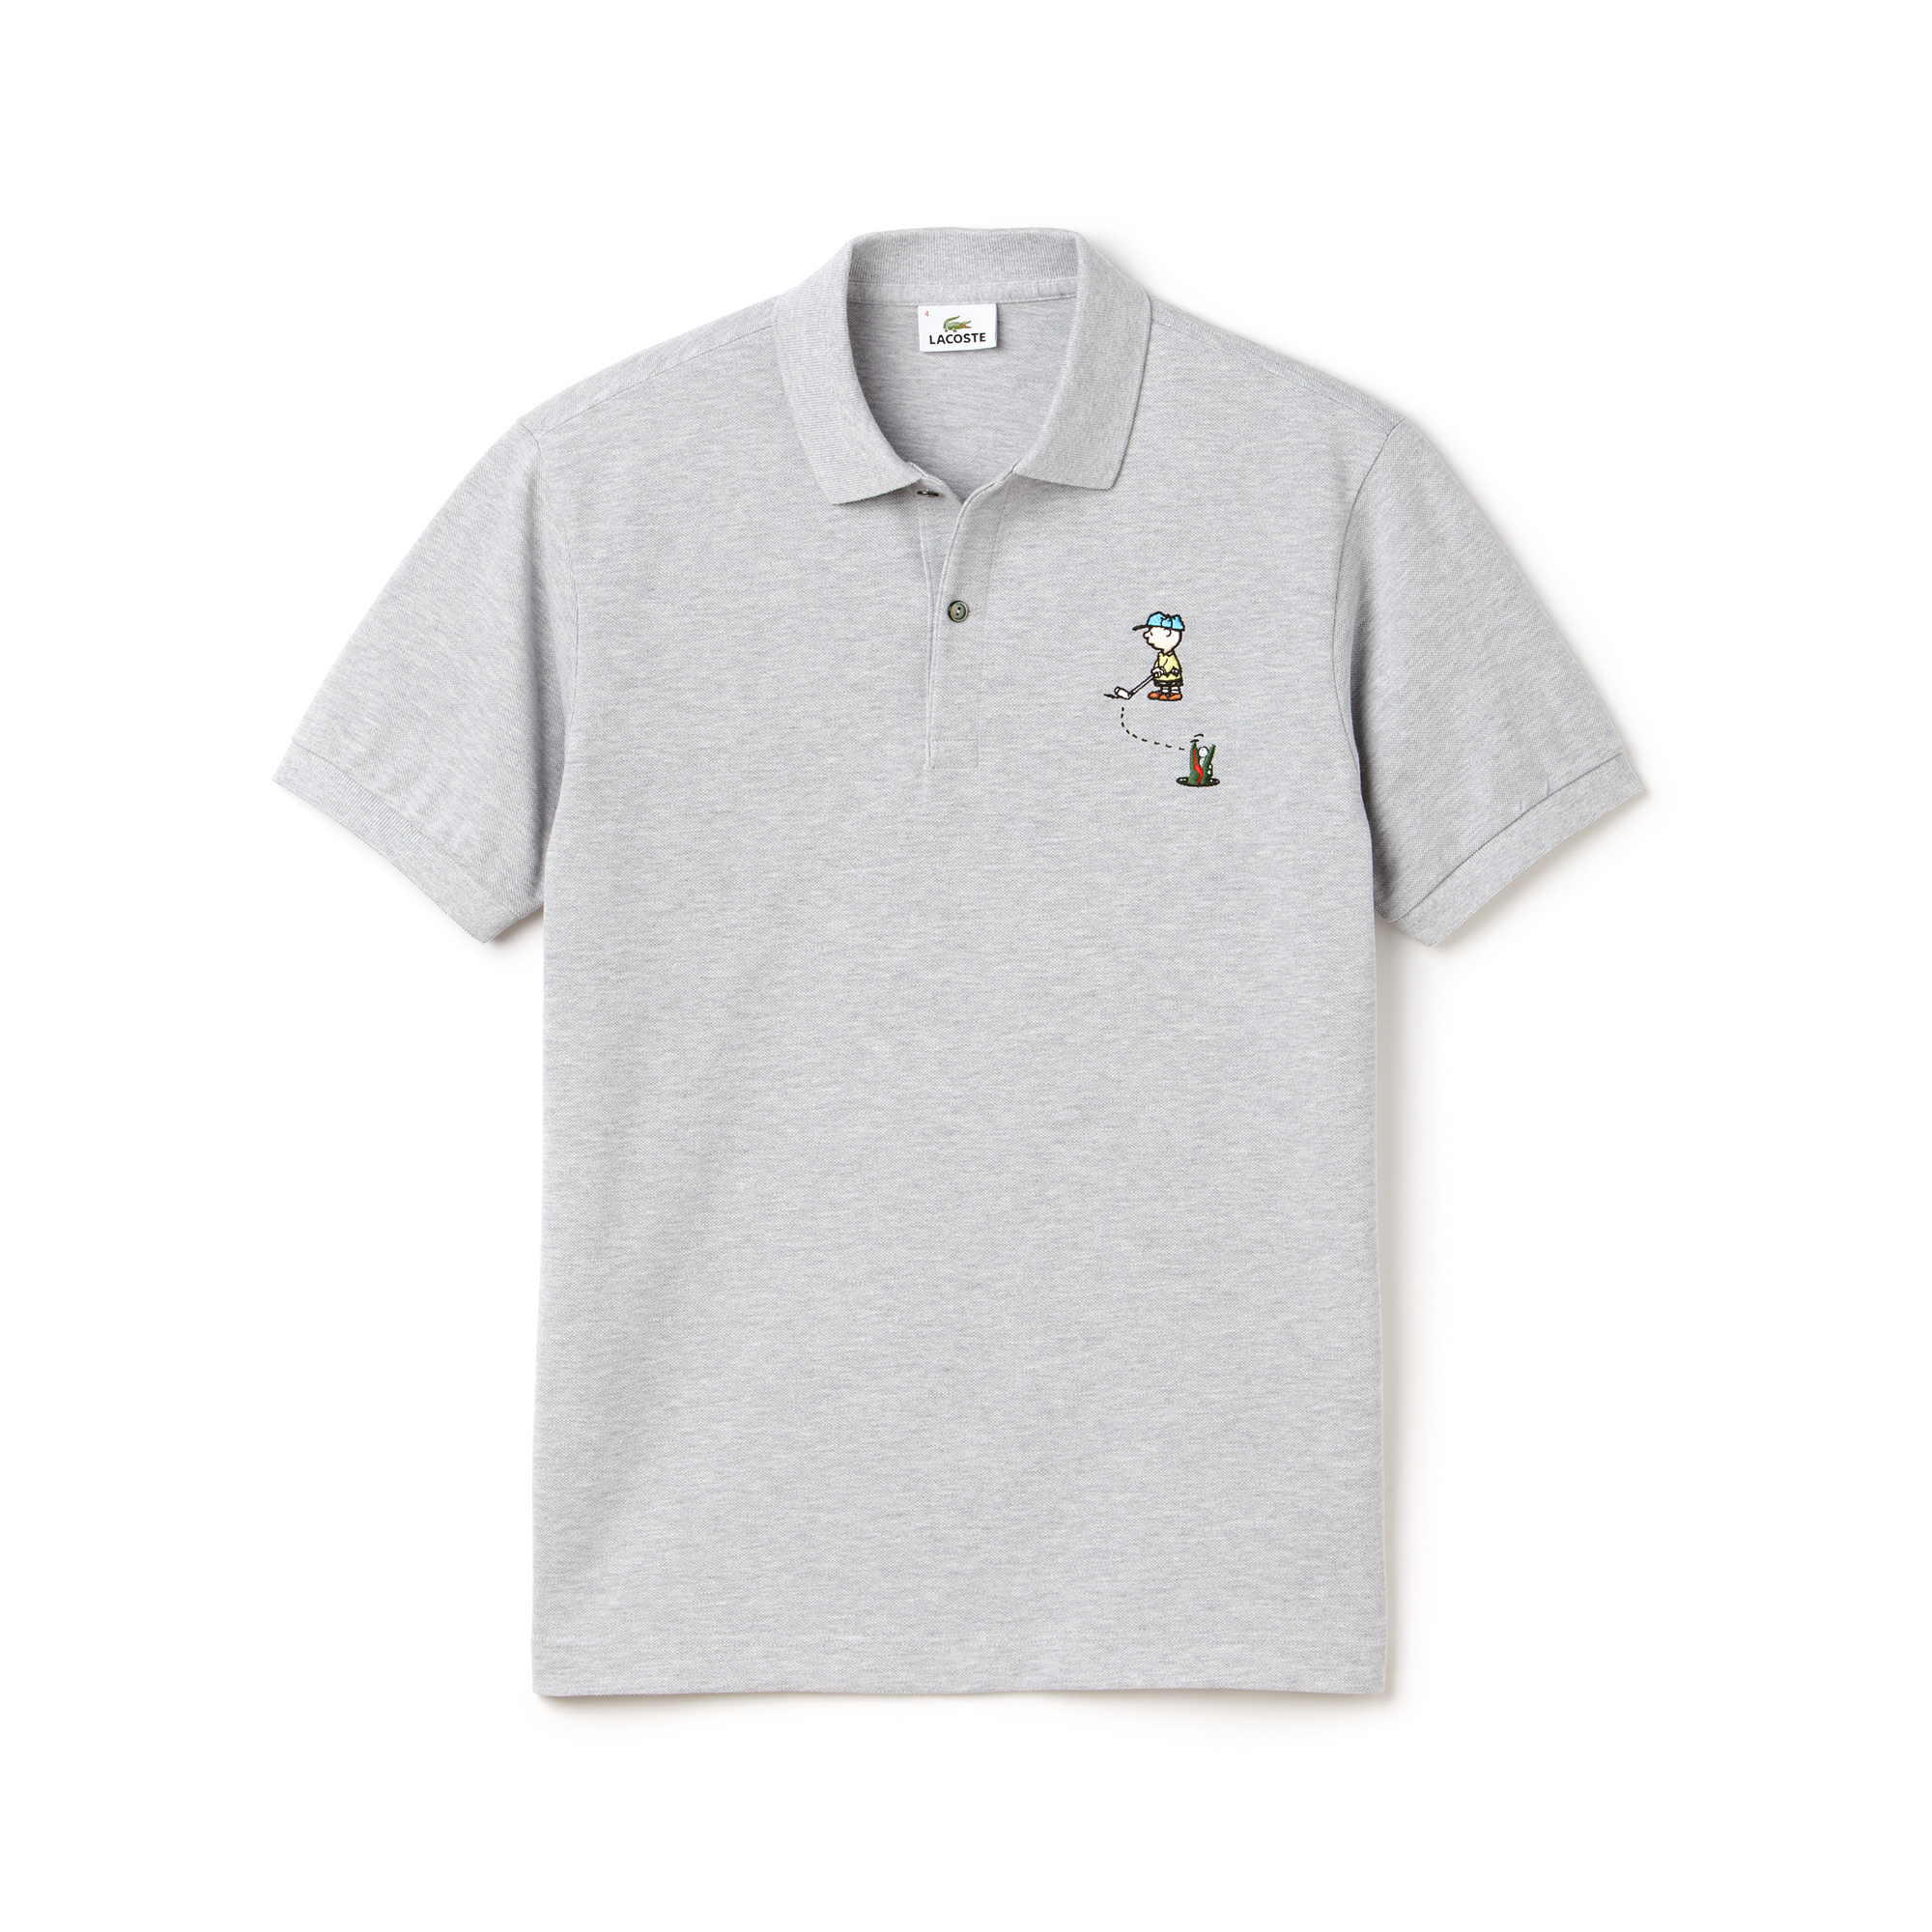 Ud desinficere Tilstedeværelse Lacoste collaborate with Snoopy and Charlie Brown - A&E Magazine